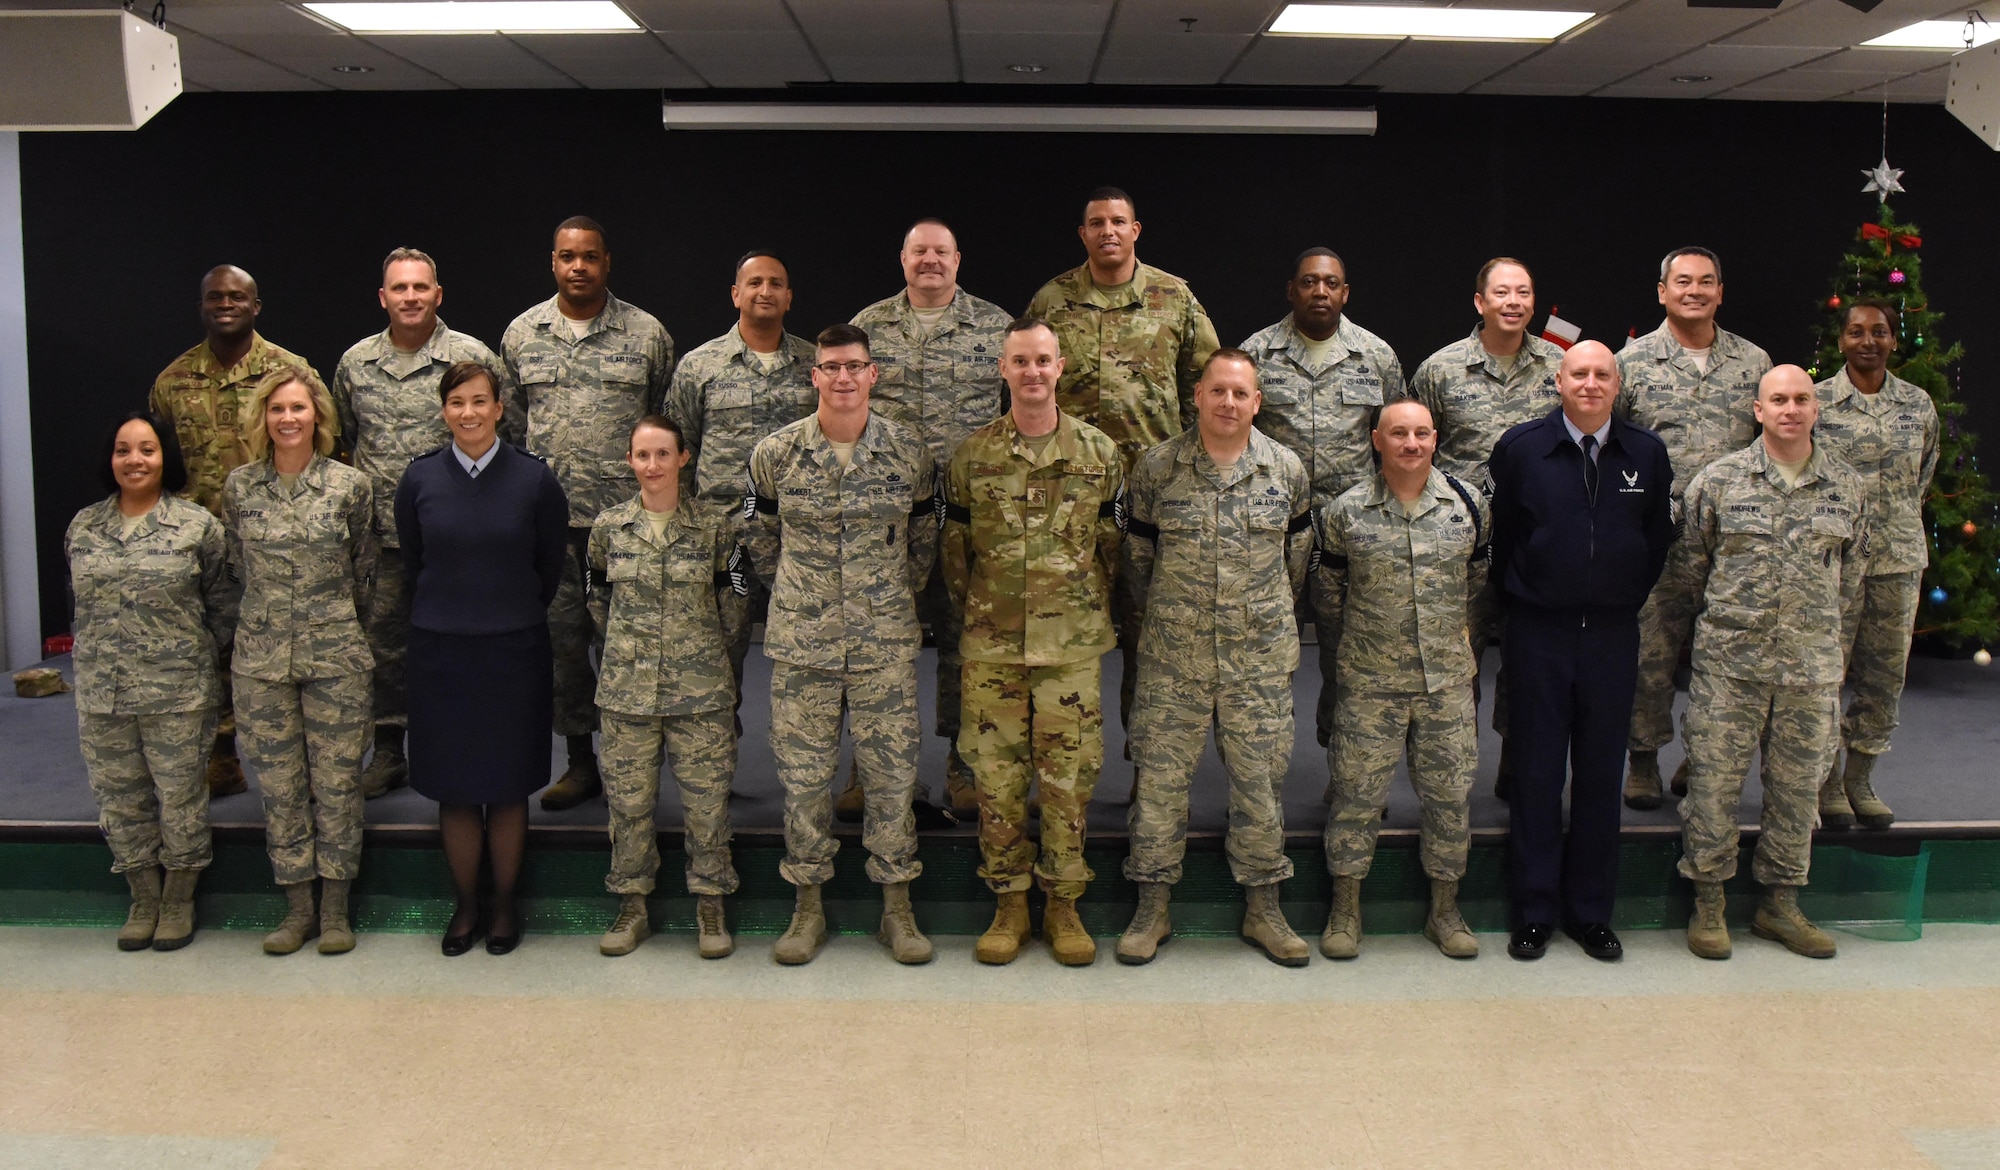 U.S. Air Force Col. Debra Lovette, 81st Training Wing commander, and Chief Master Sgt. David Pizzuto, 81st TRW command chief, pose for a photo with Keesler's newest chief master sergeant selects at Keesler Air Force Base, Mississippi, Dec. 4, 2018. Senior Master Sgts. Katie Hammonds, 81st Medical Support Squadron medical logistics flight chief; Kevin Lambert, 81st Security Forces Squadron operations superintendent; Charles Sargent, 338th Training Squadron flight chief; Michael Sterling, 81st Communications Squadron superintendent, and Andrew Bodine, 81st Training Group Military Training superintendent, were notified of their selection to the rank of chief master sergeant by base leadership and chiefs. (U.S. Air Force photo by Kemberly Groue)